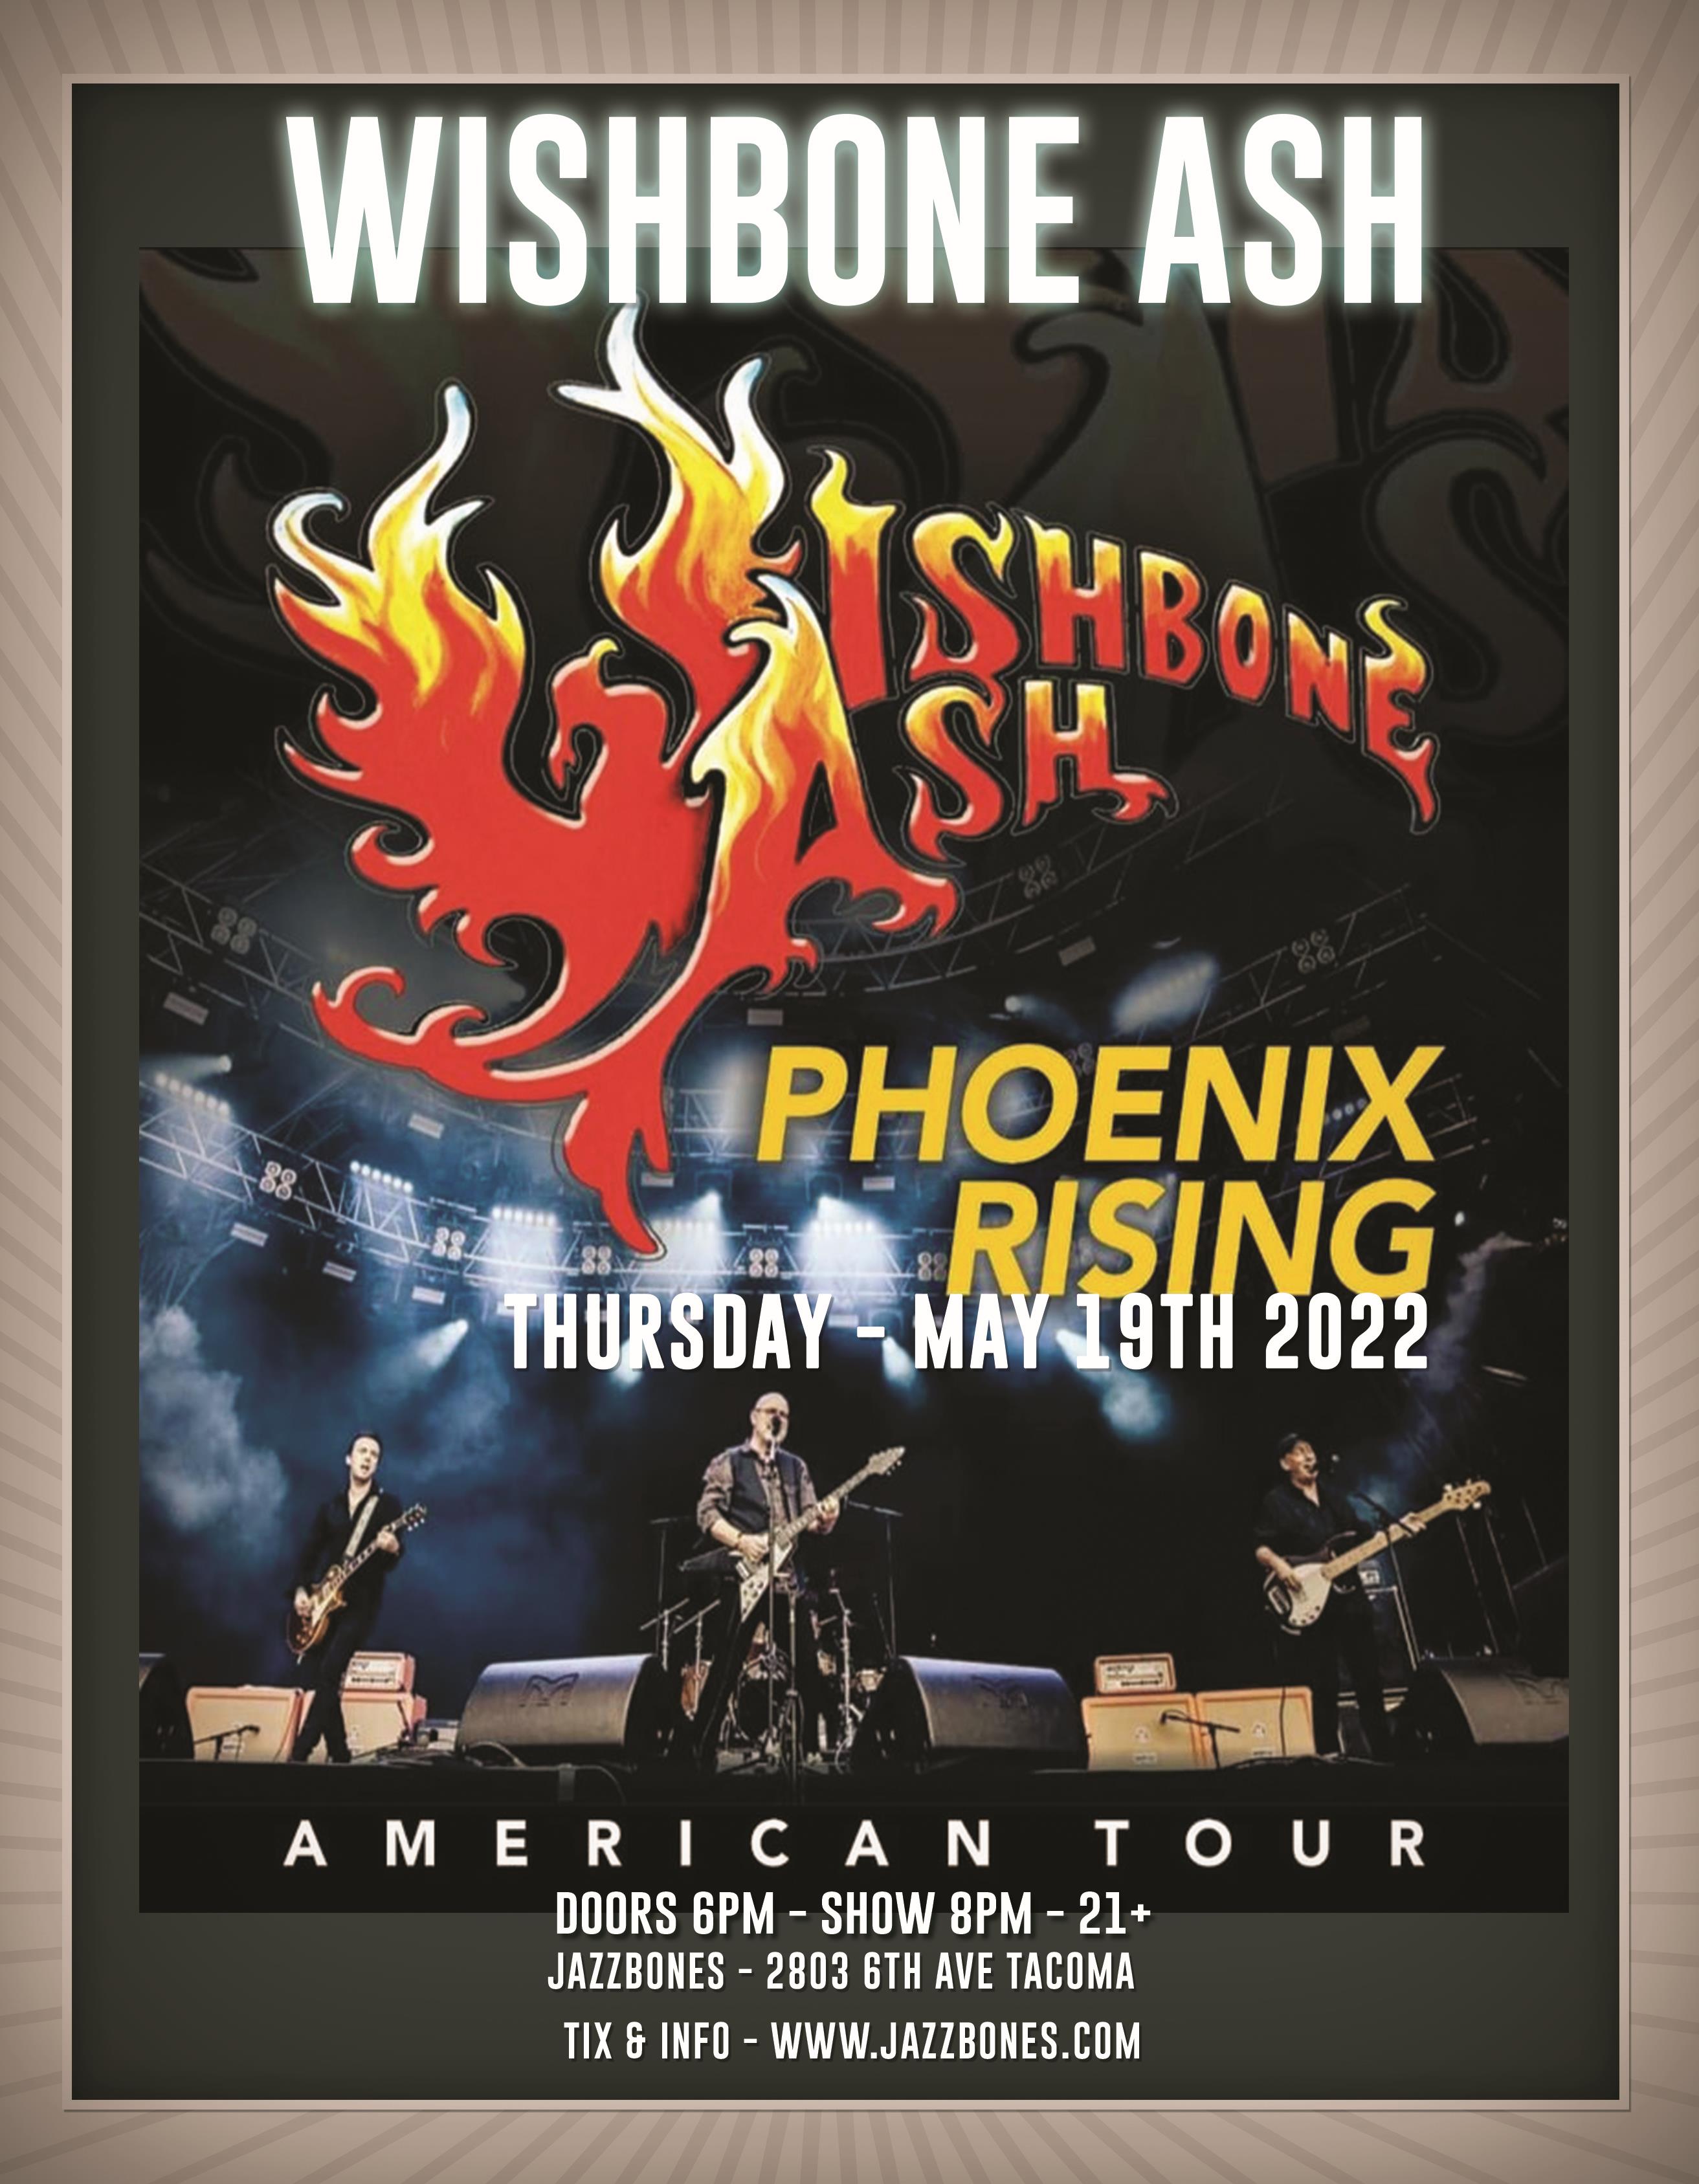 Buy Tickets to Wishbone Ash Phoenix Rising America Tour in on